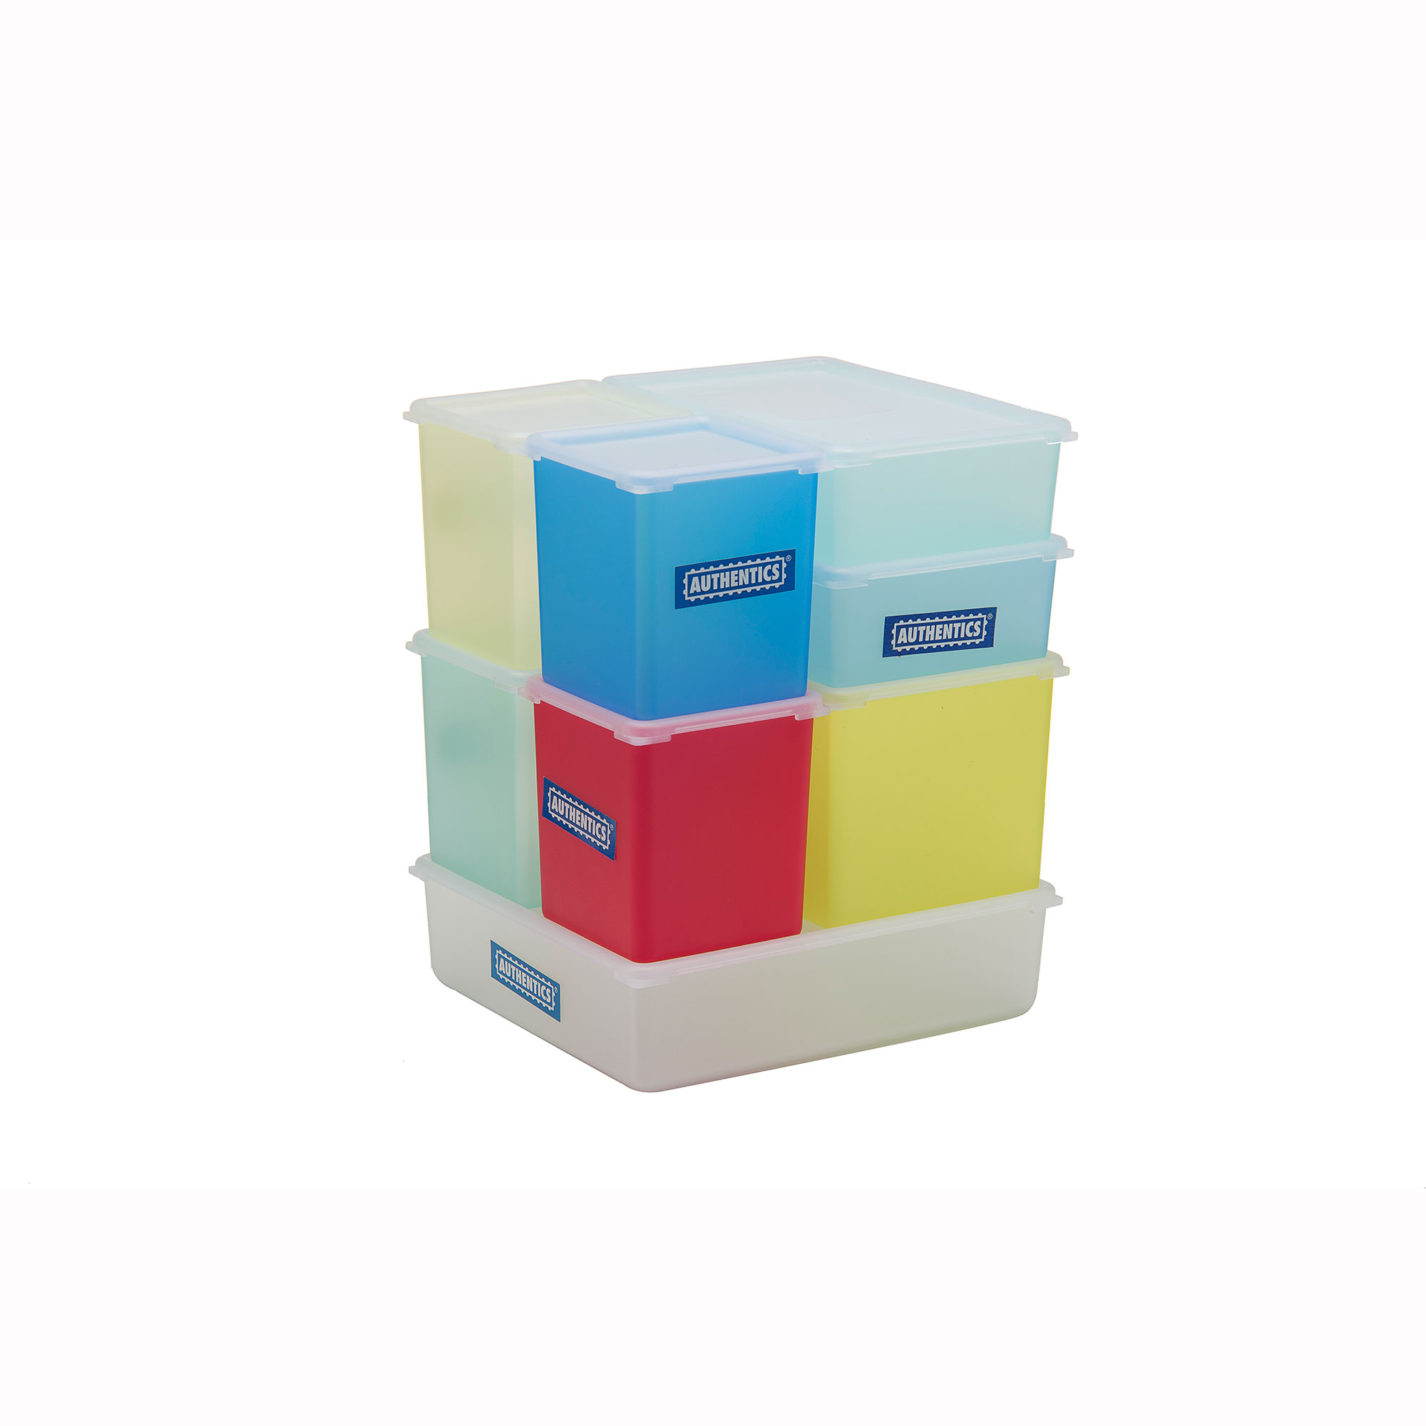 Set of plastic food containers in  different sizes of rectangles in translucent blues, yellows, greens, and red, all with translucent white lids, and fitting together in a cube-shaped stack.